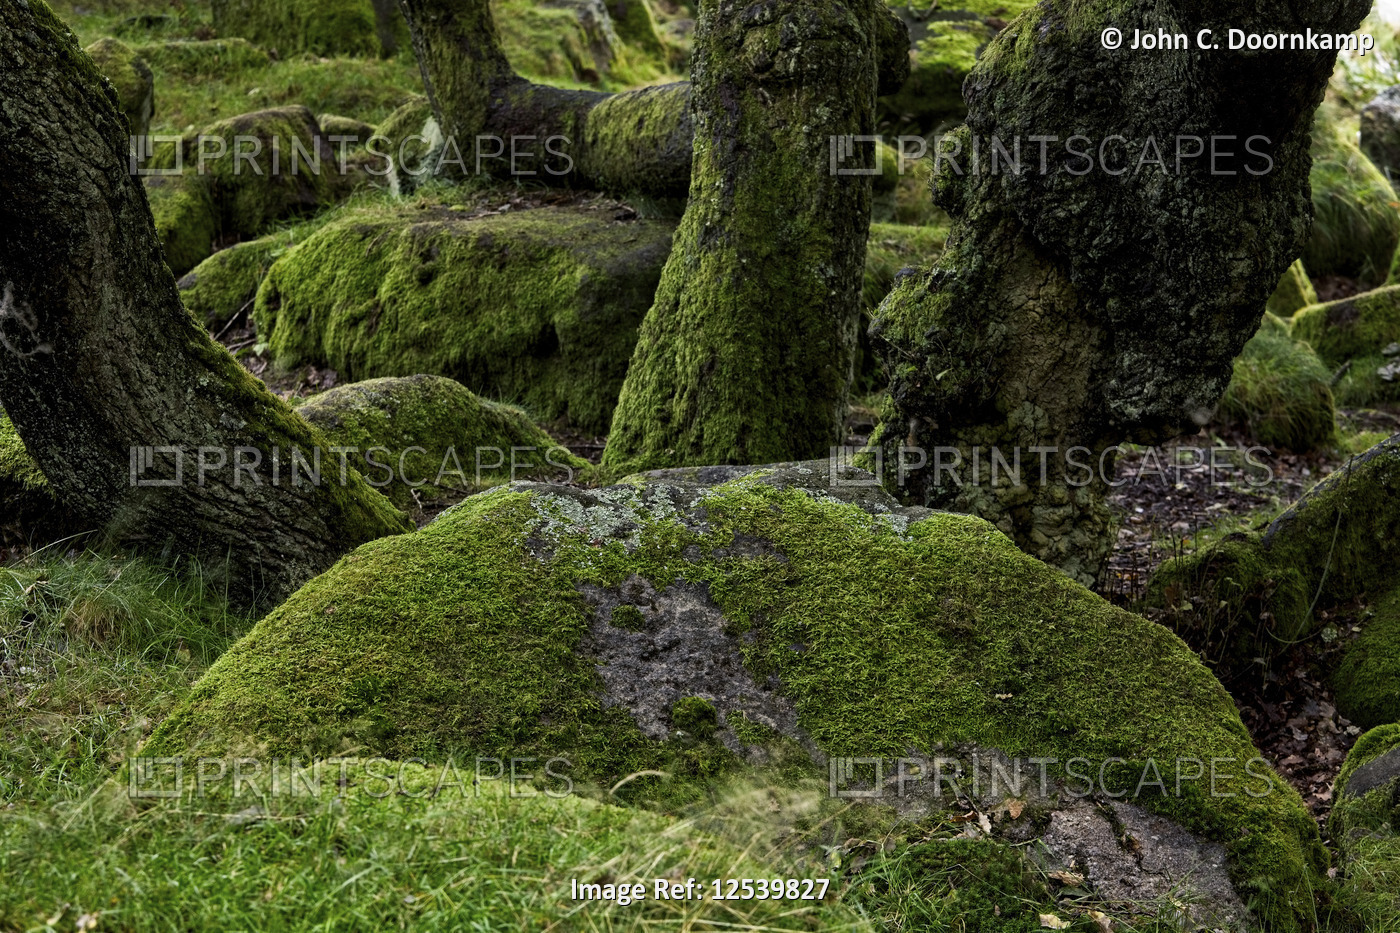 RICH GREEN MOSS COVERING BOULDER AND TREE TRUNKS